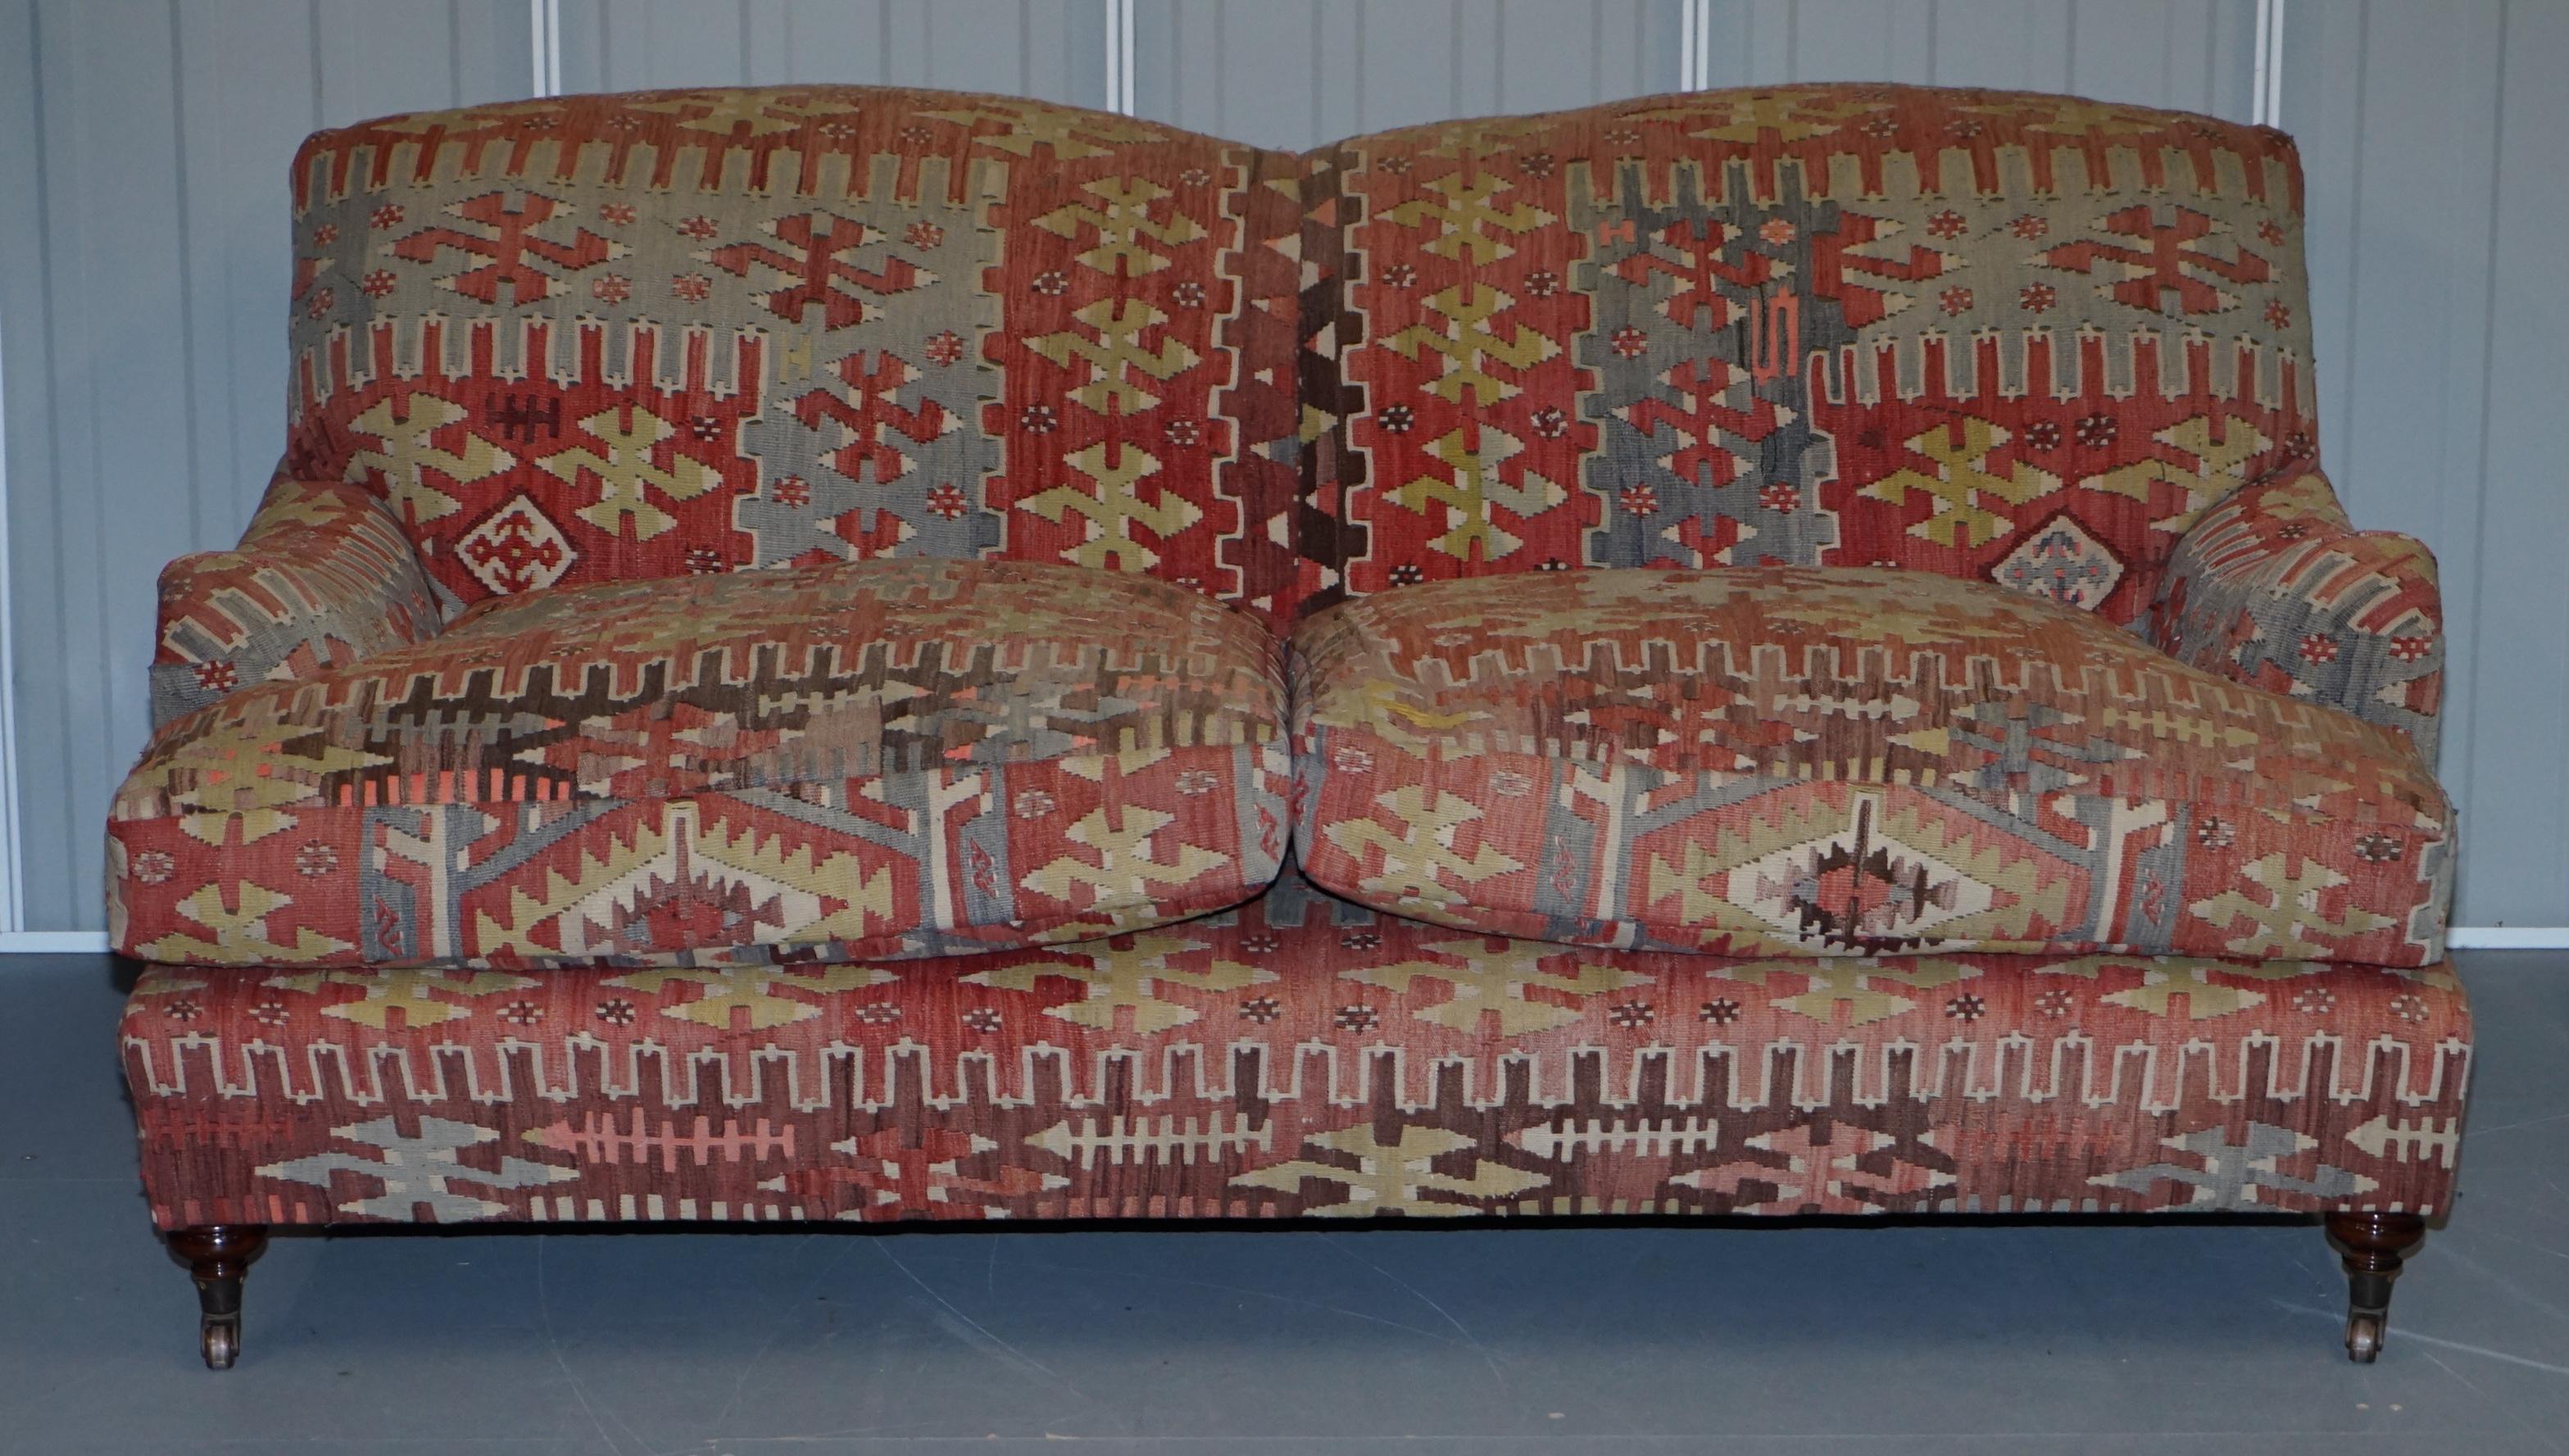 We are delighted to offer for sale this stunning vintage George Smith Kilim signature arm sofa with feather filled cushions

A very good looking and iconic sofa, hand made in England by the genius’s at George Smith

The sofa model is called the